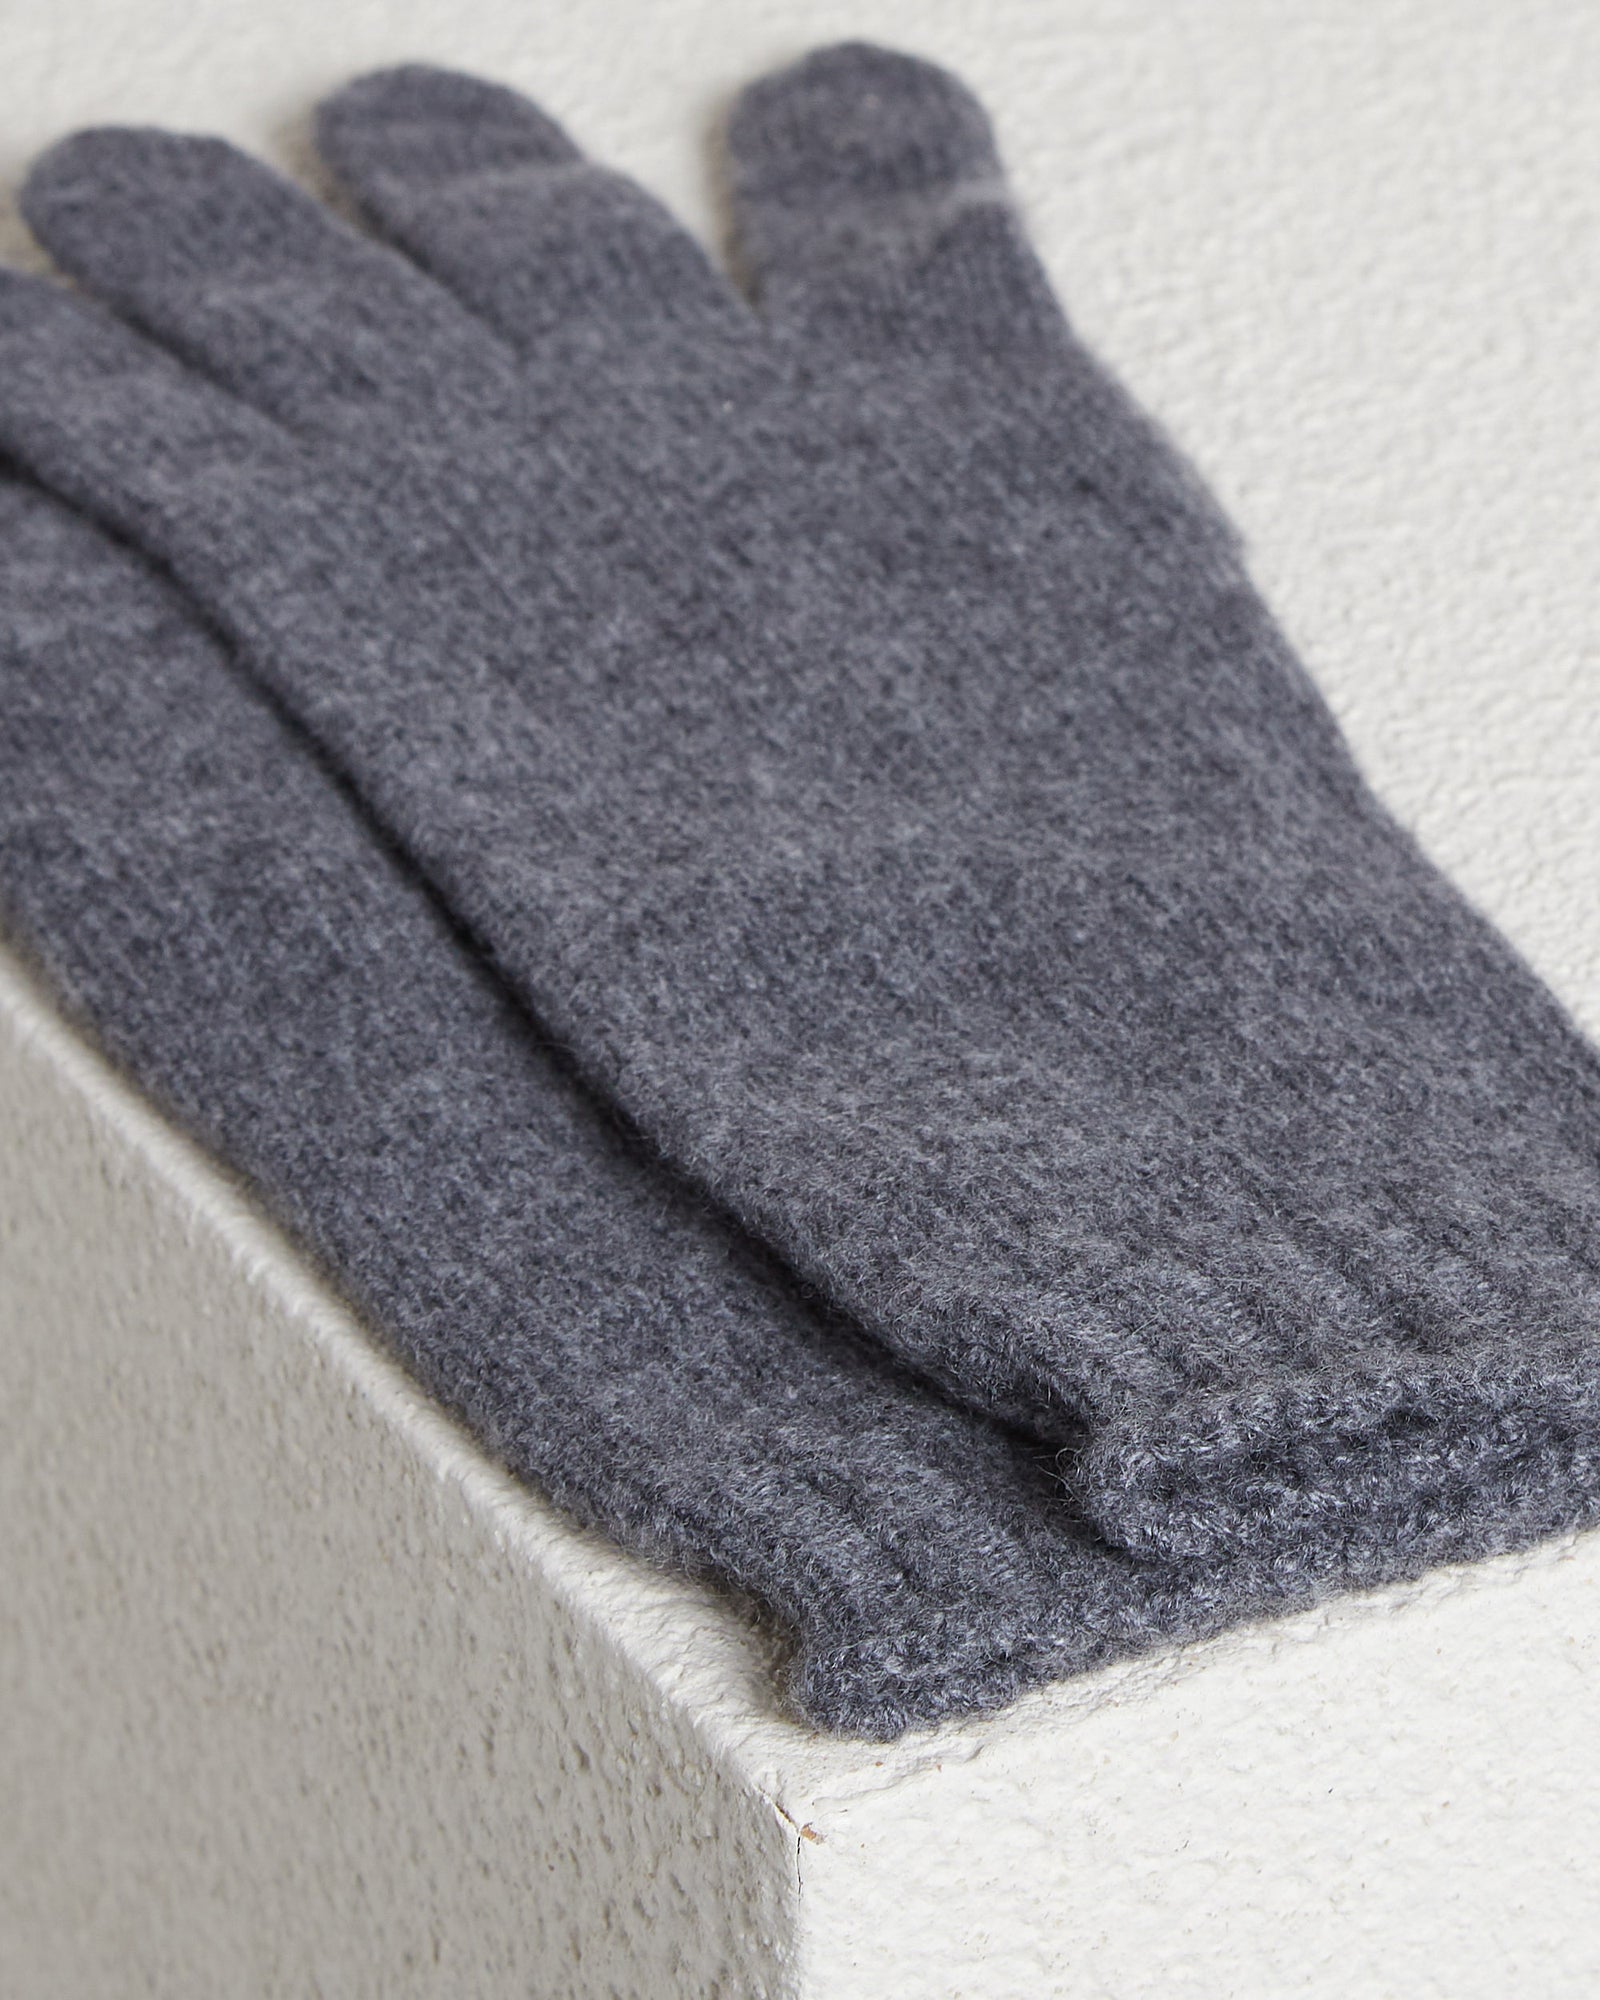 Grey Kid Cashmere knitted gloves